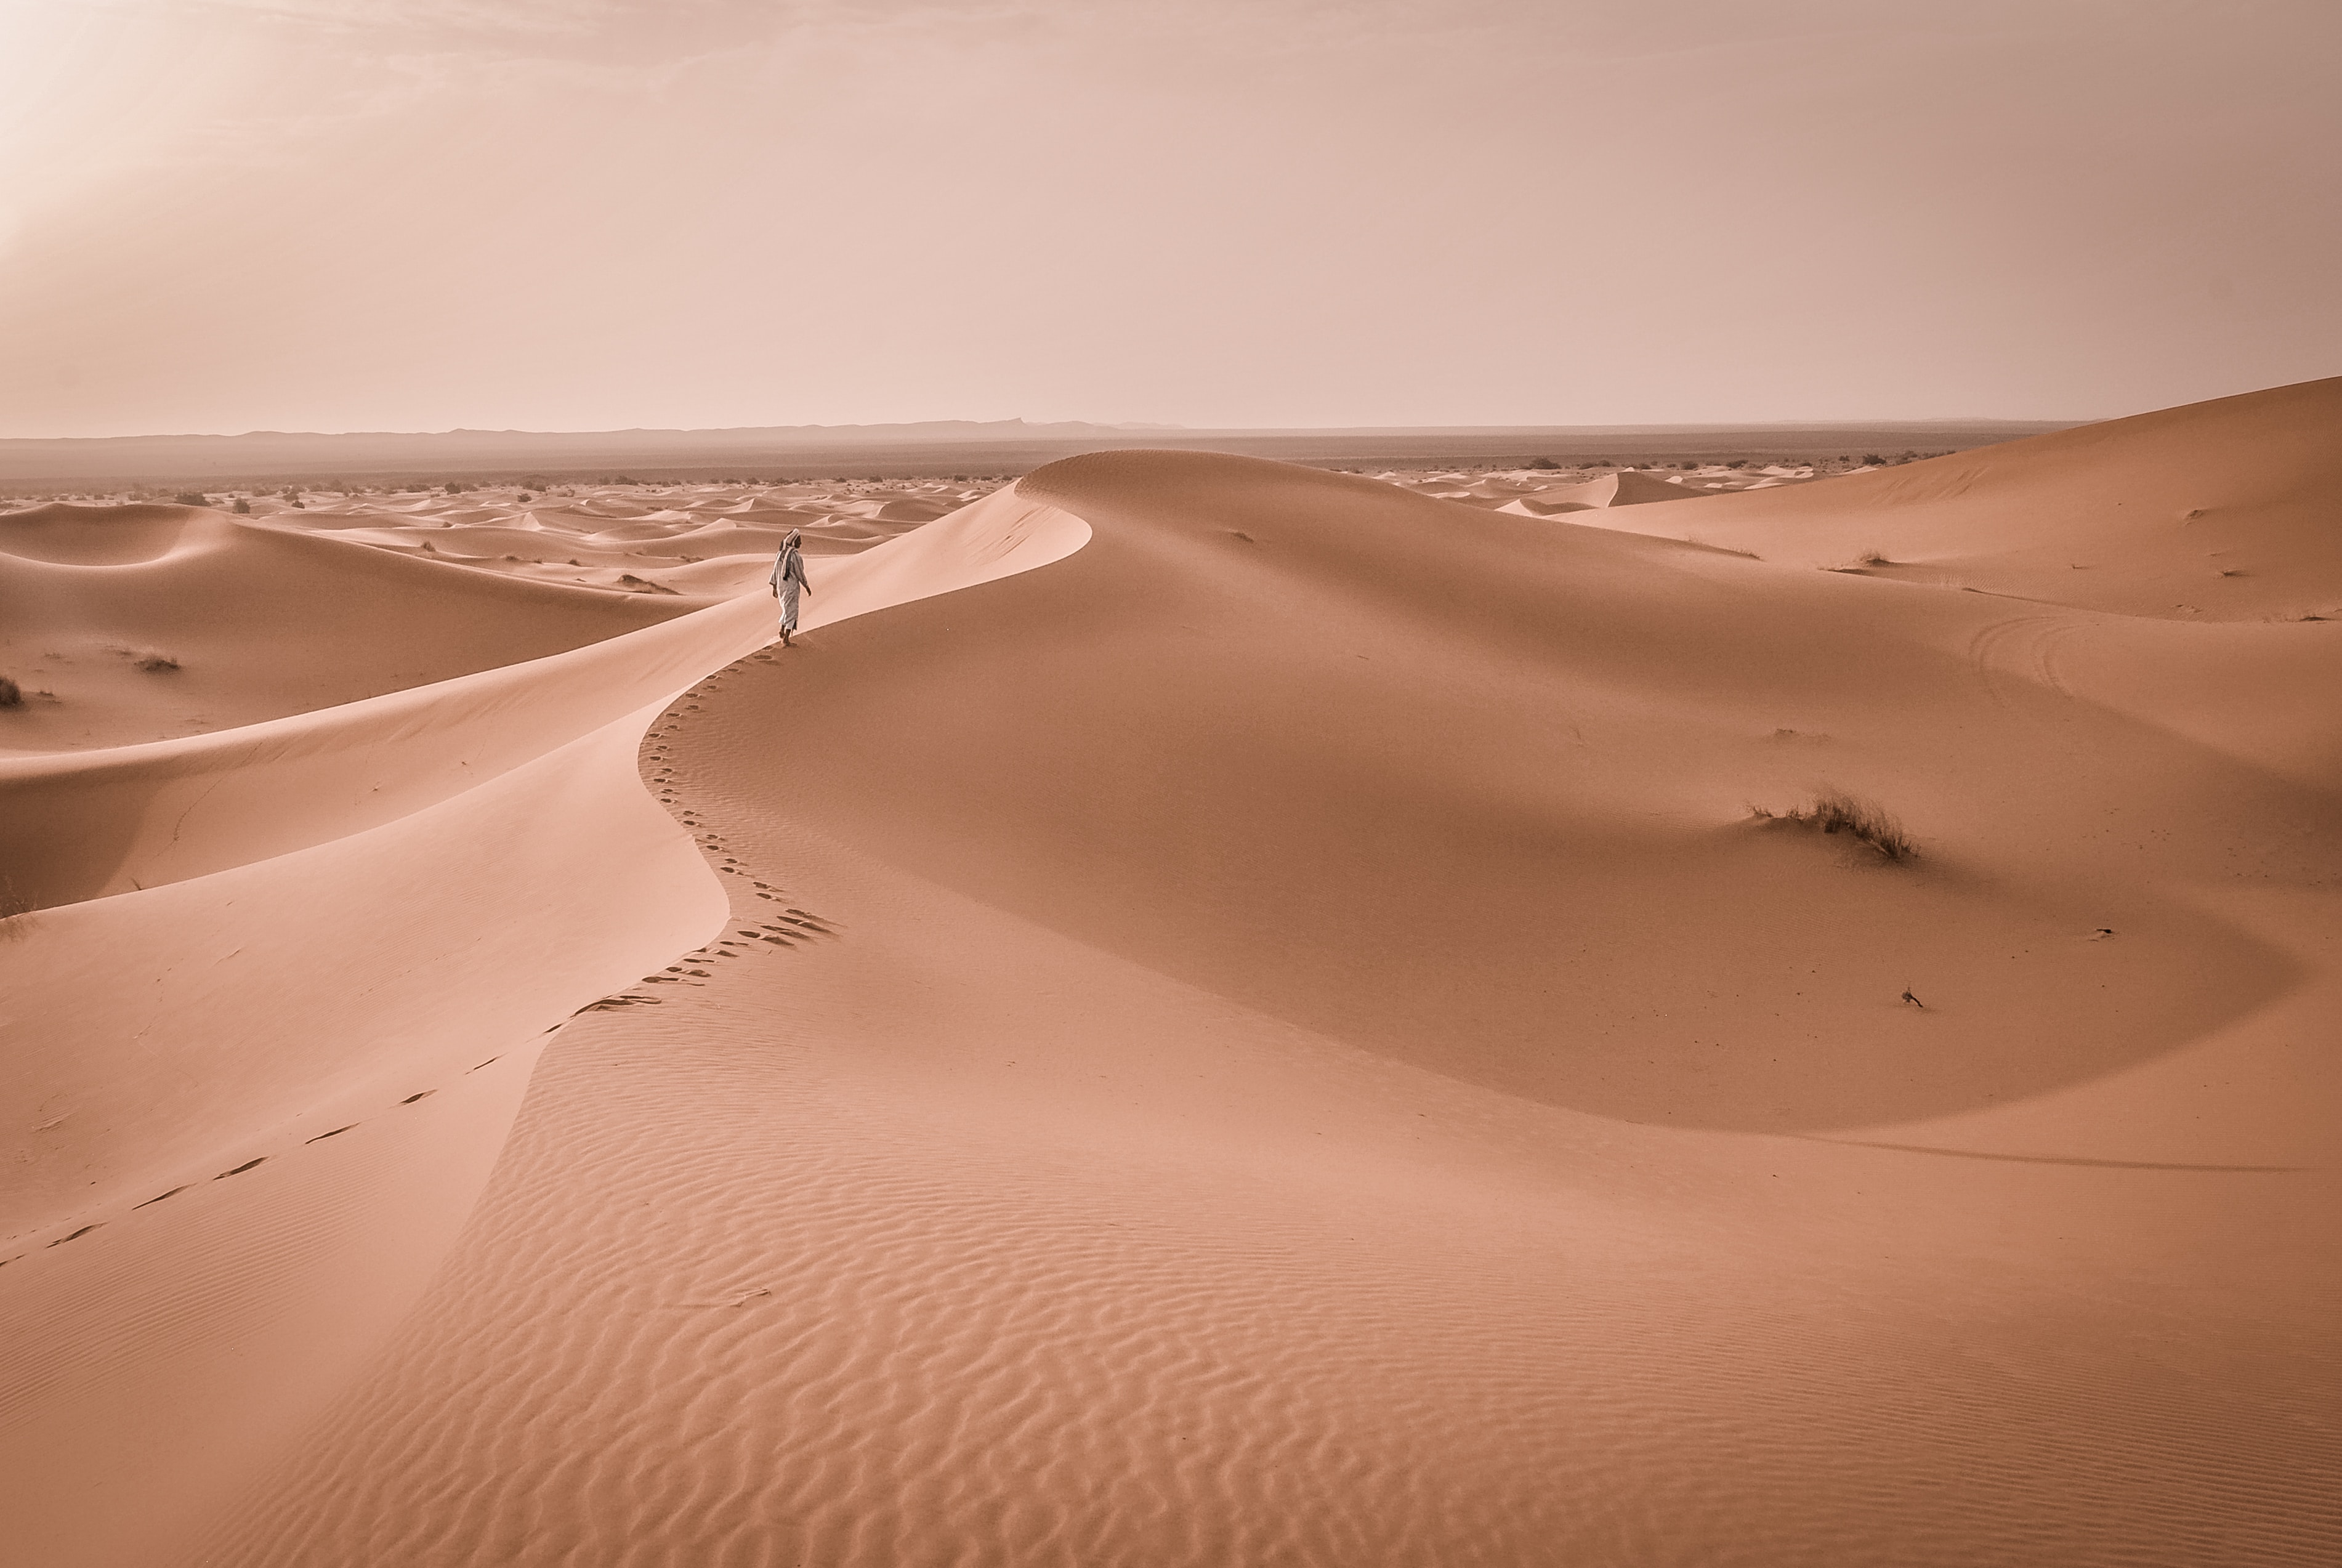 The Challenges of Desert Photography & How to Prepare